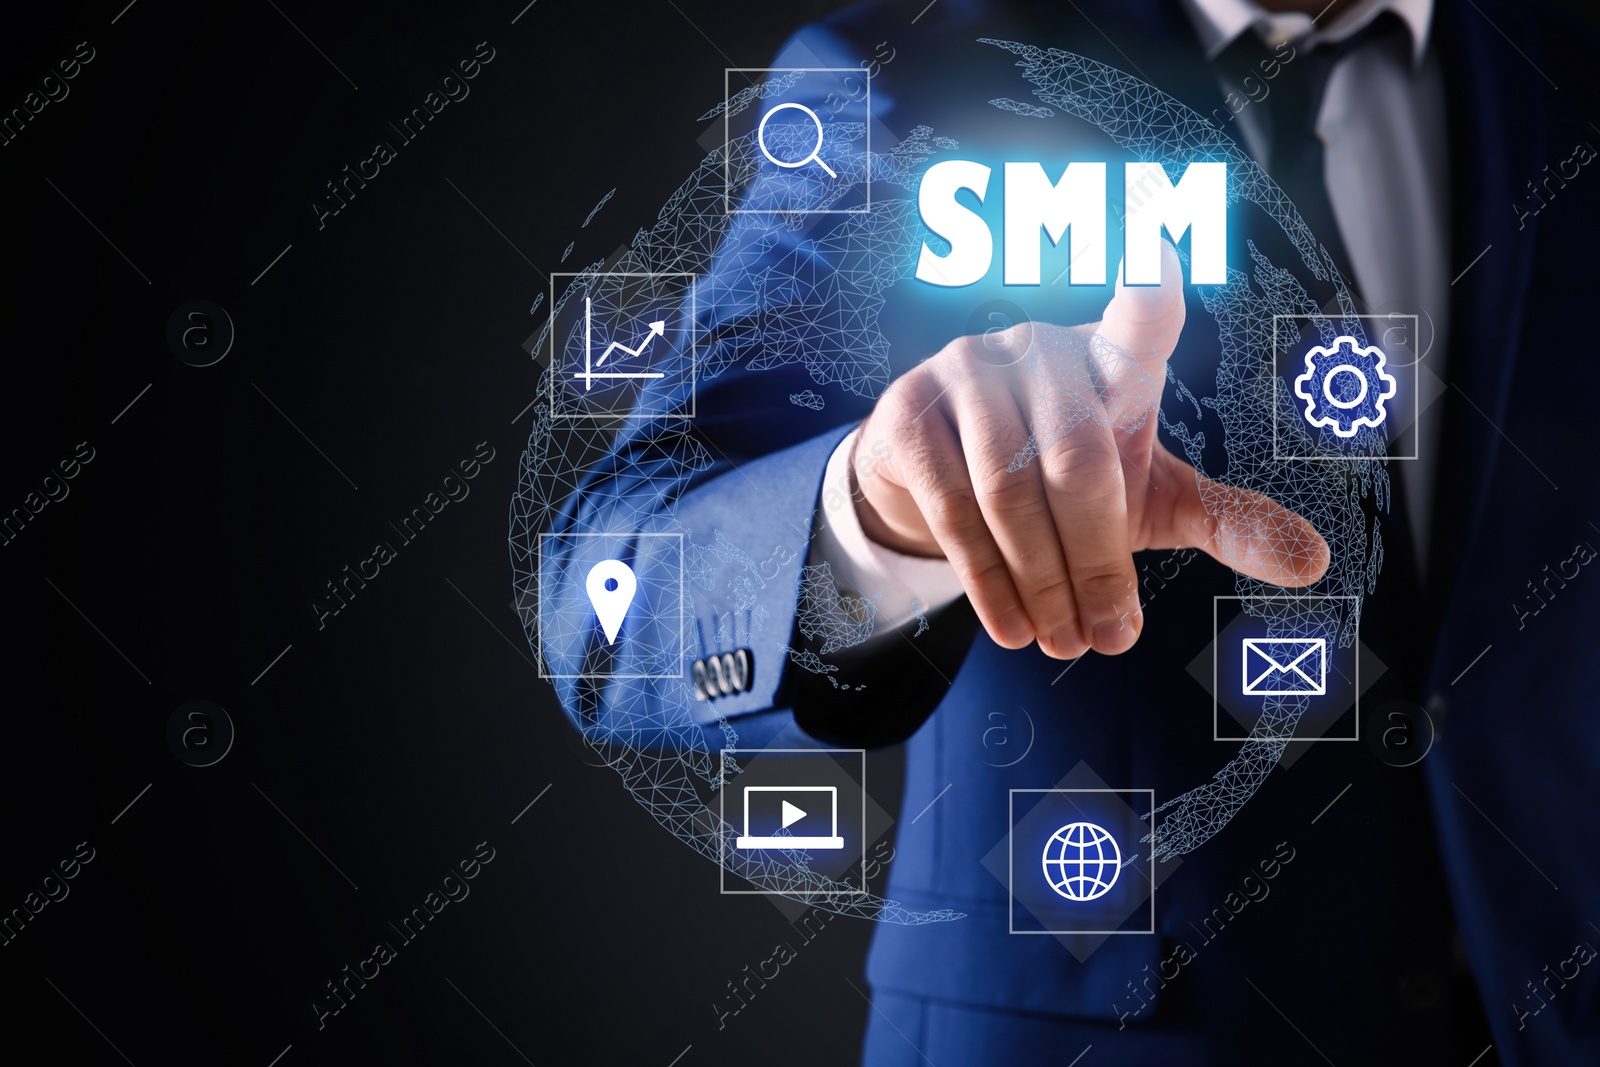 Image of Social media marketing concept. Man touching virtual icon SMM against dark background, focus on hand